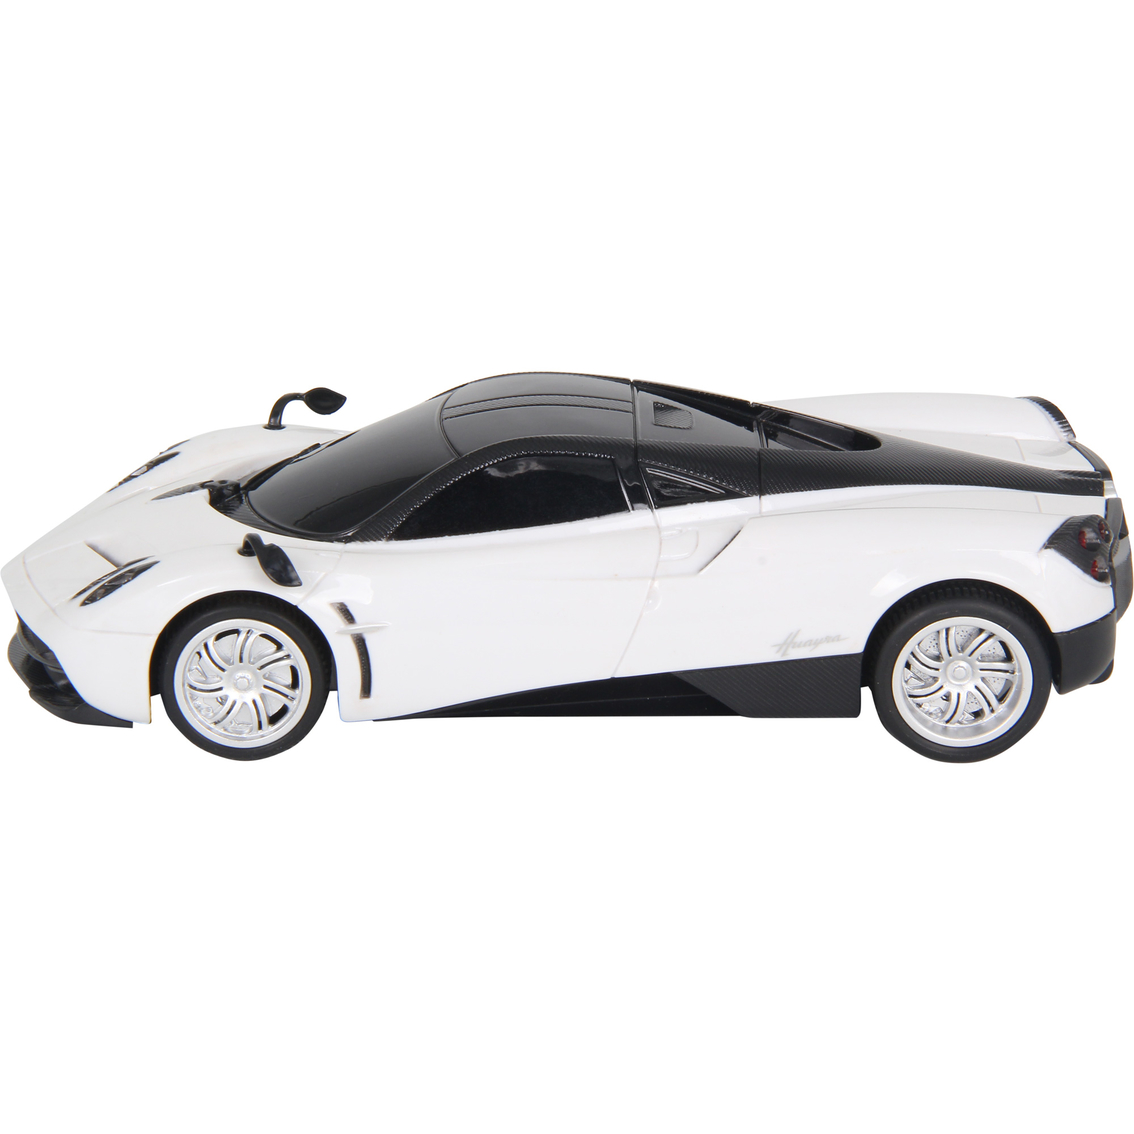 Braha 1:24 Scale Licensed RC Car - Image 7 of 10